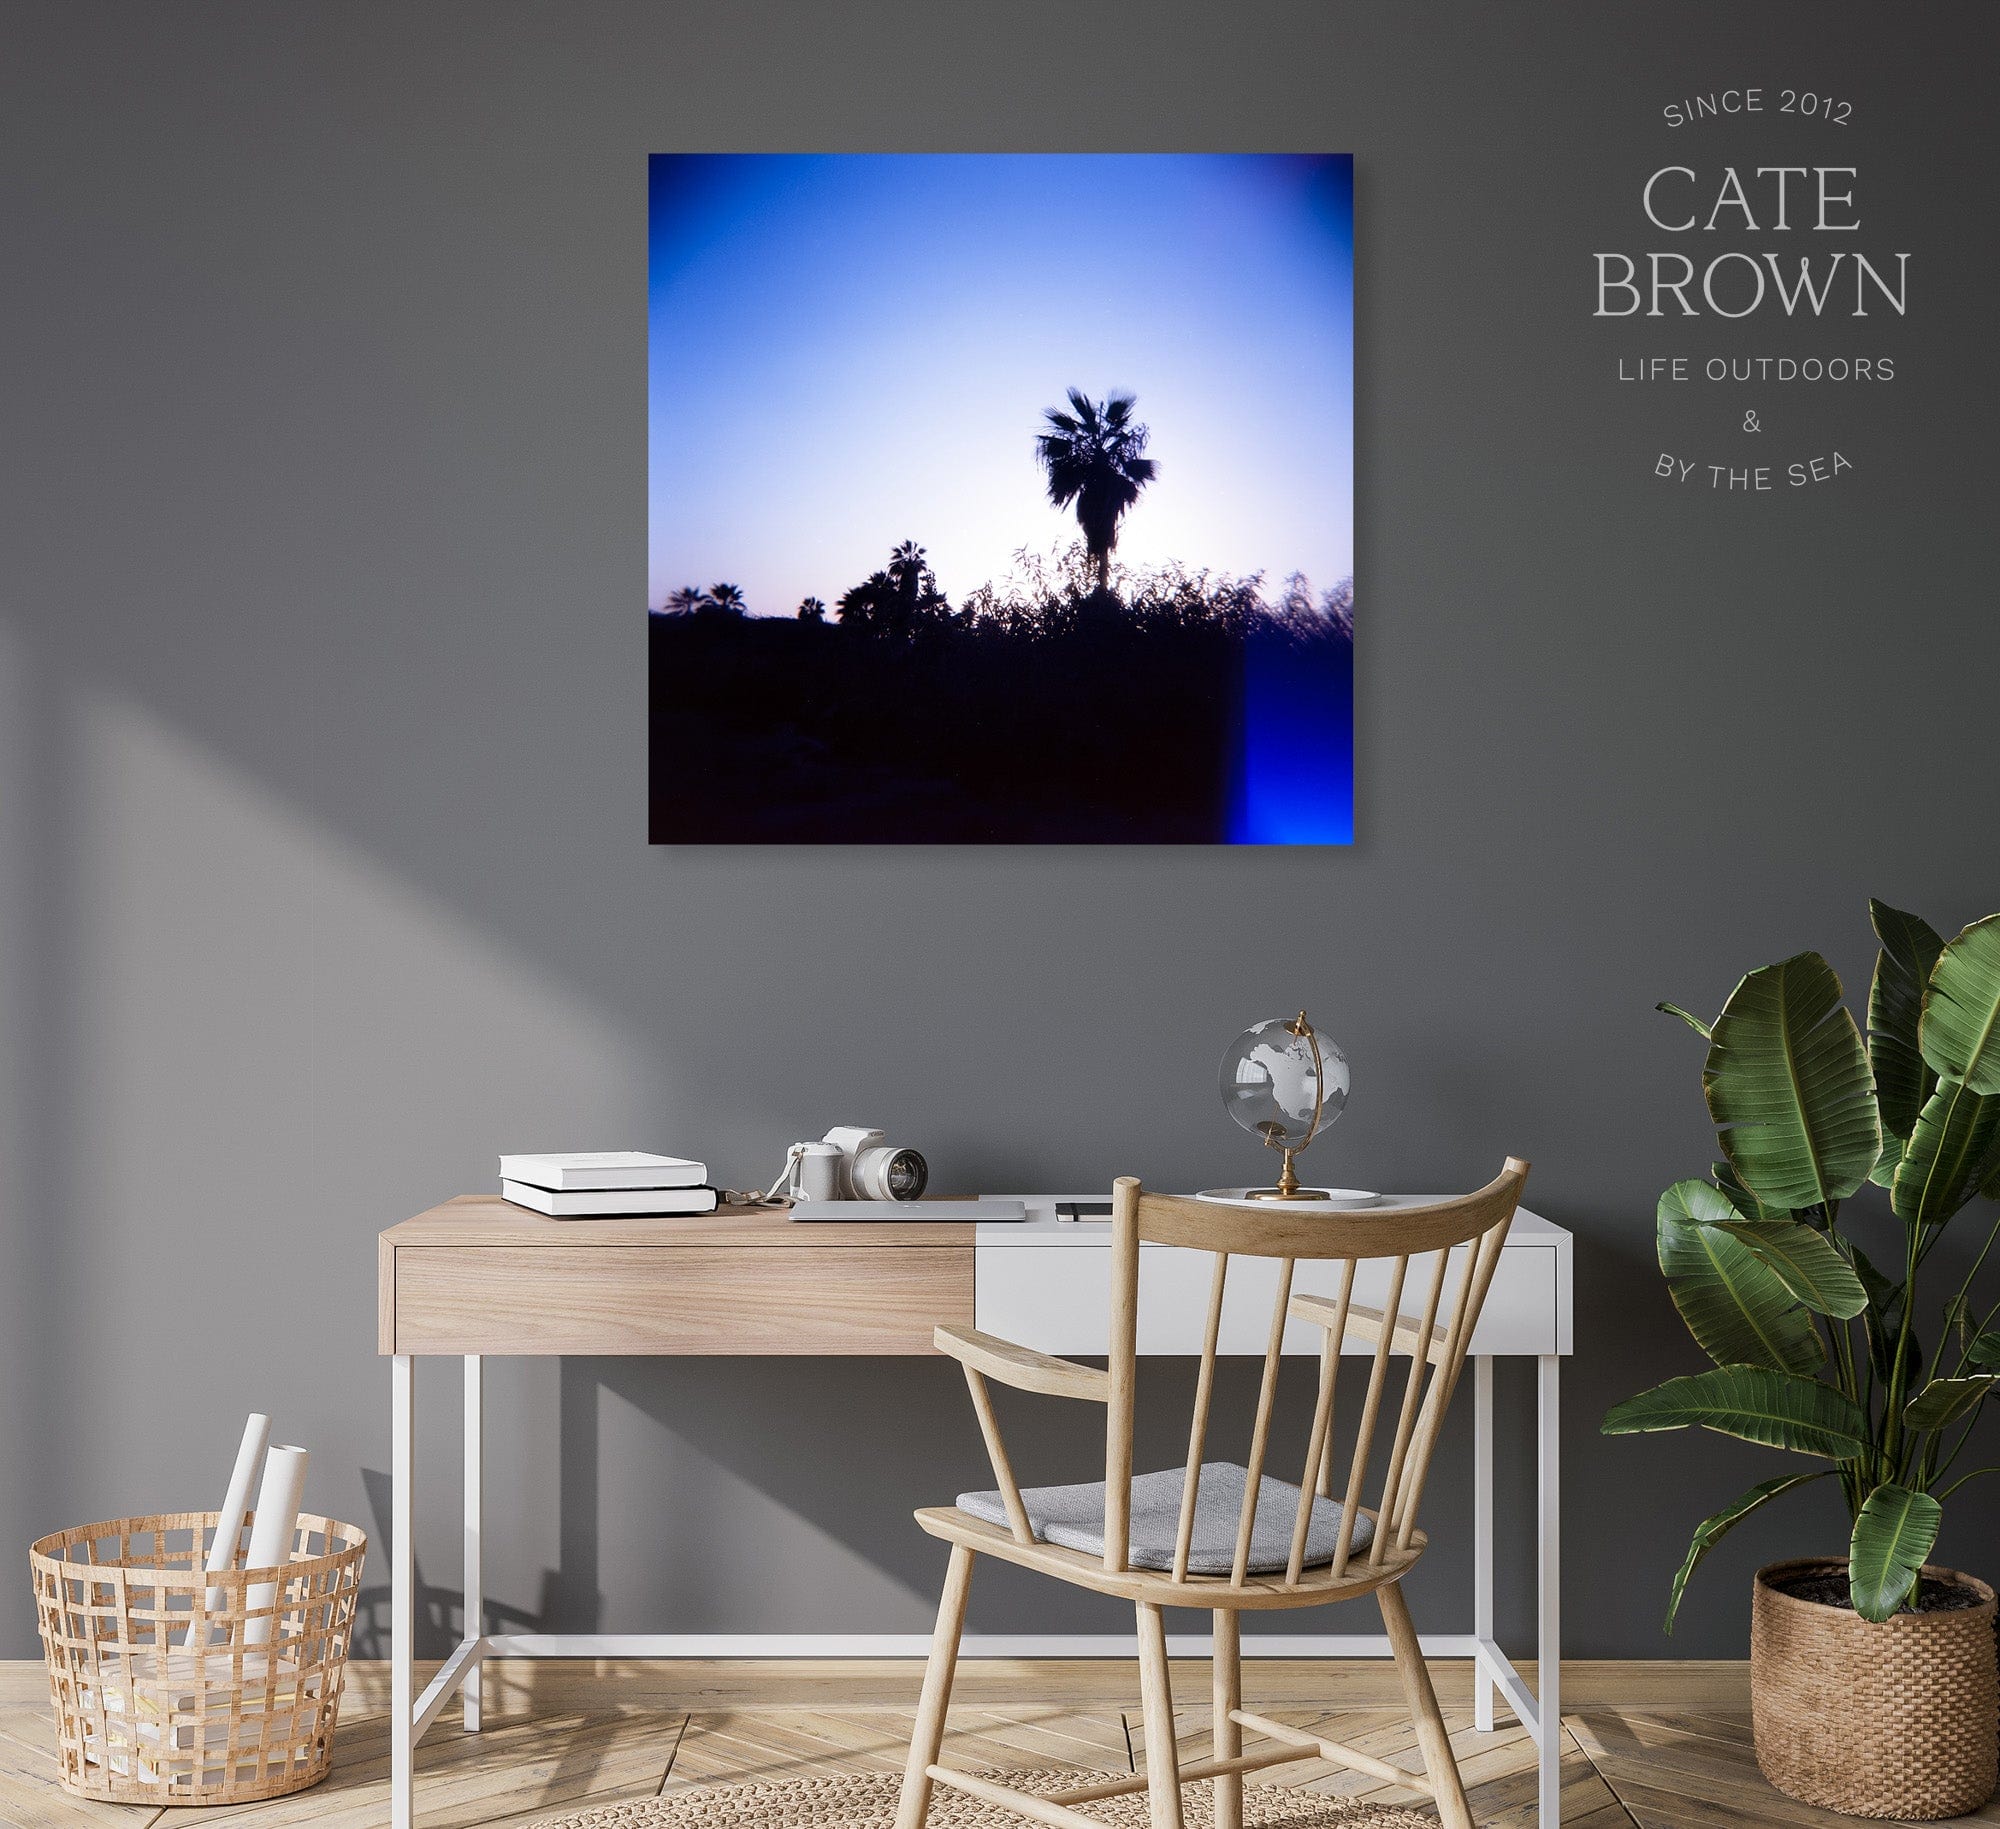 Cate Brown Photo Canvas / 16"x16" / None (Print Only) Baja Palms #3  //  Film Photography Made to Order Ocean Fine Art